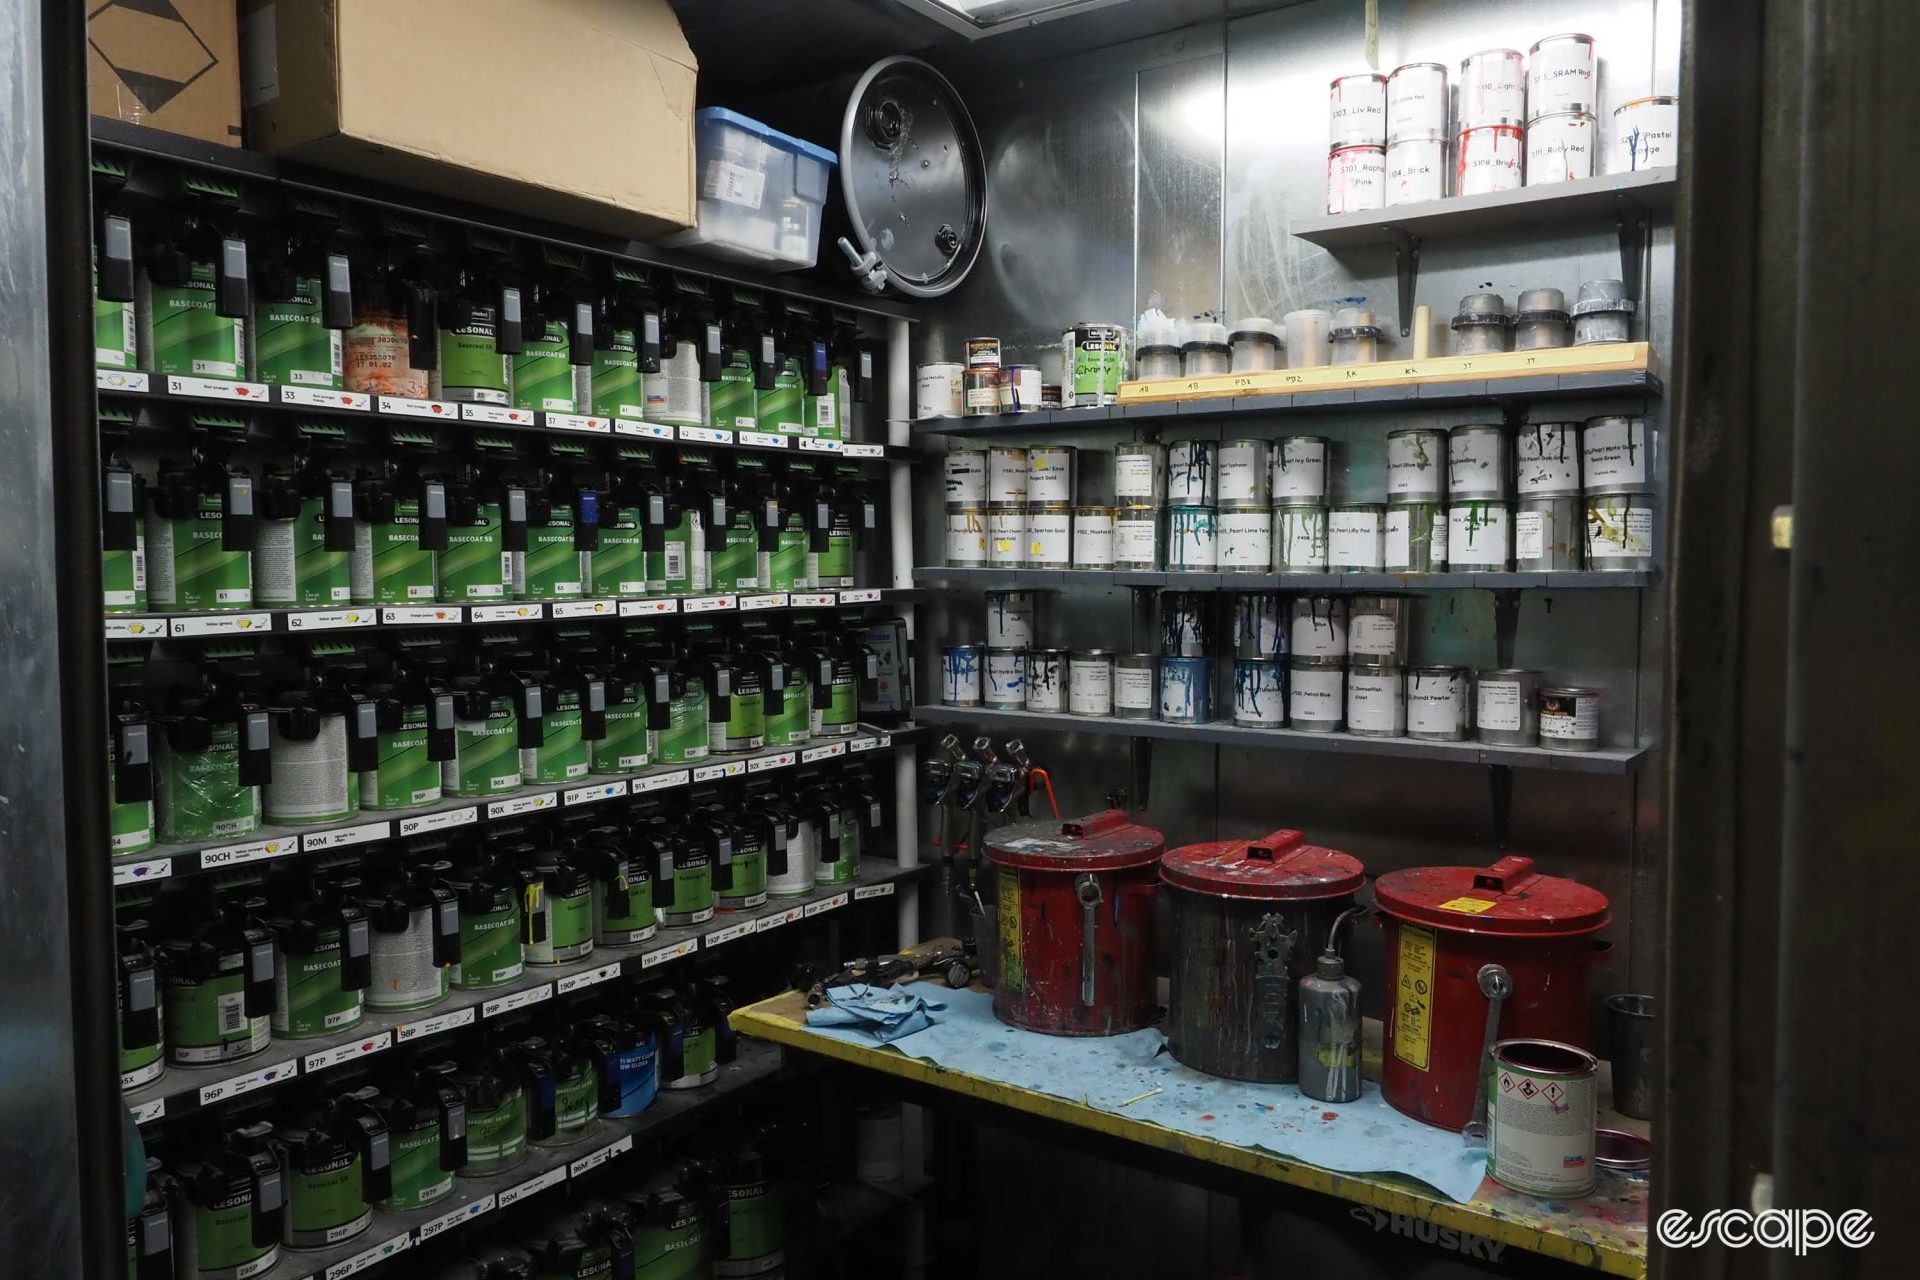 Cans and cans of paint, stacked on shelves.